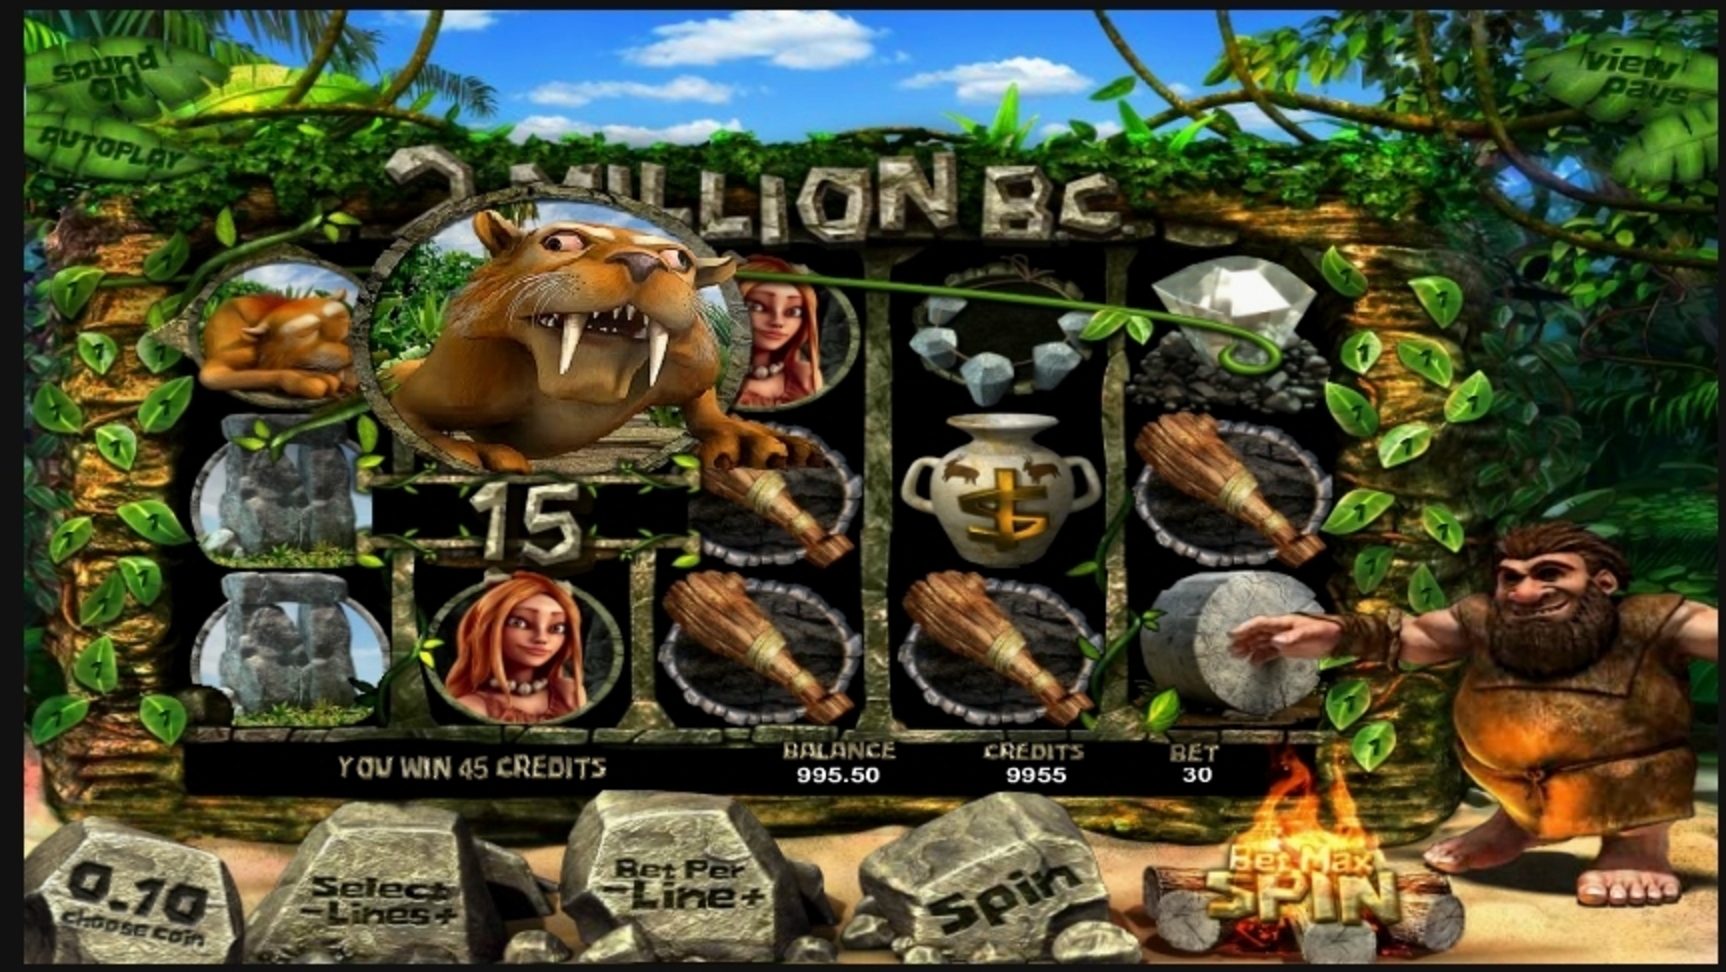 Win Money in 2 Million B.C. Free Slot Game by Betsoft